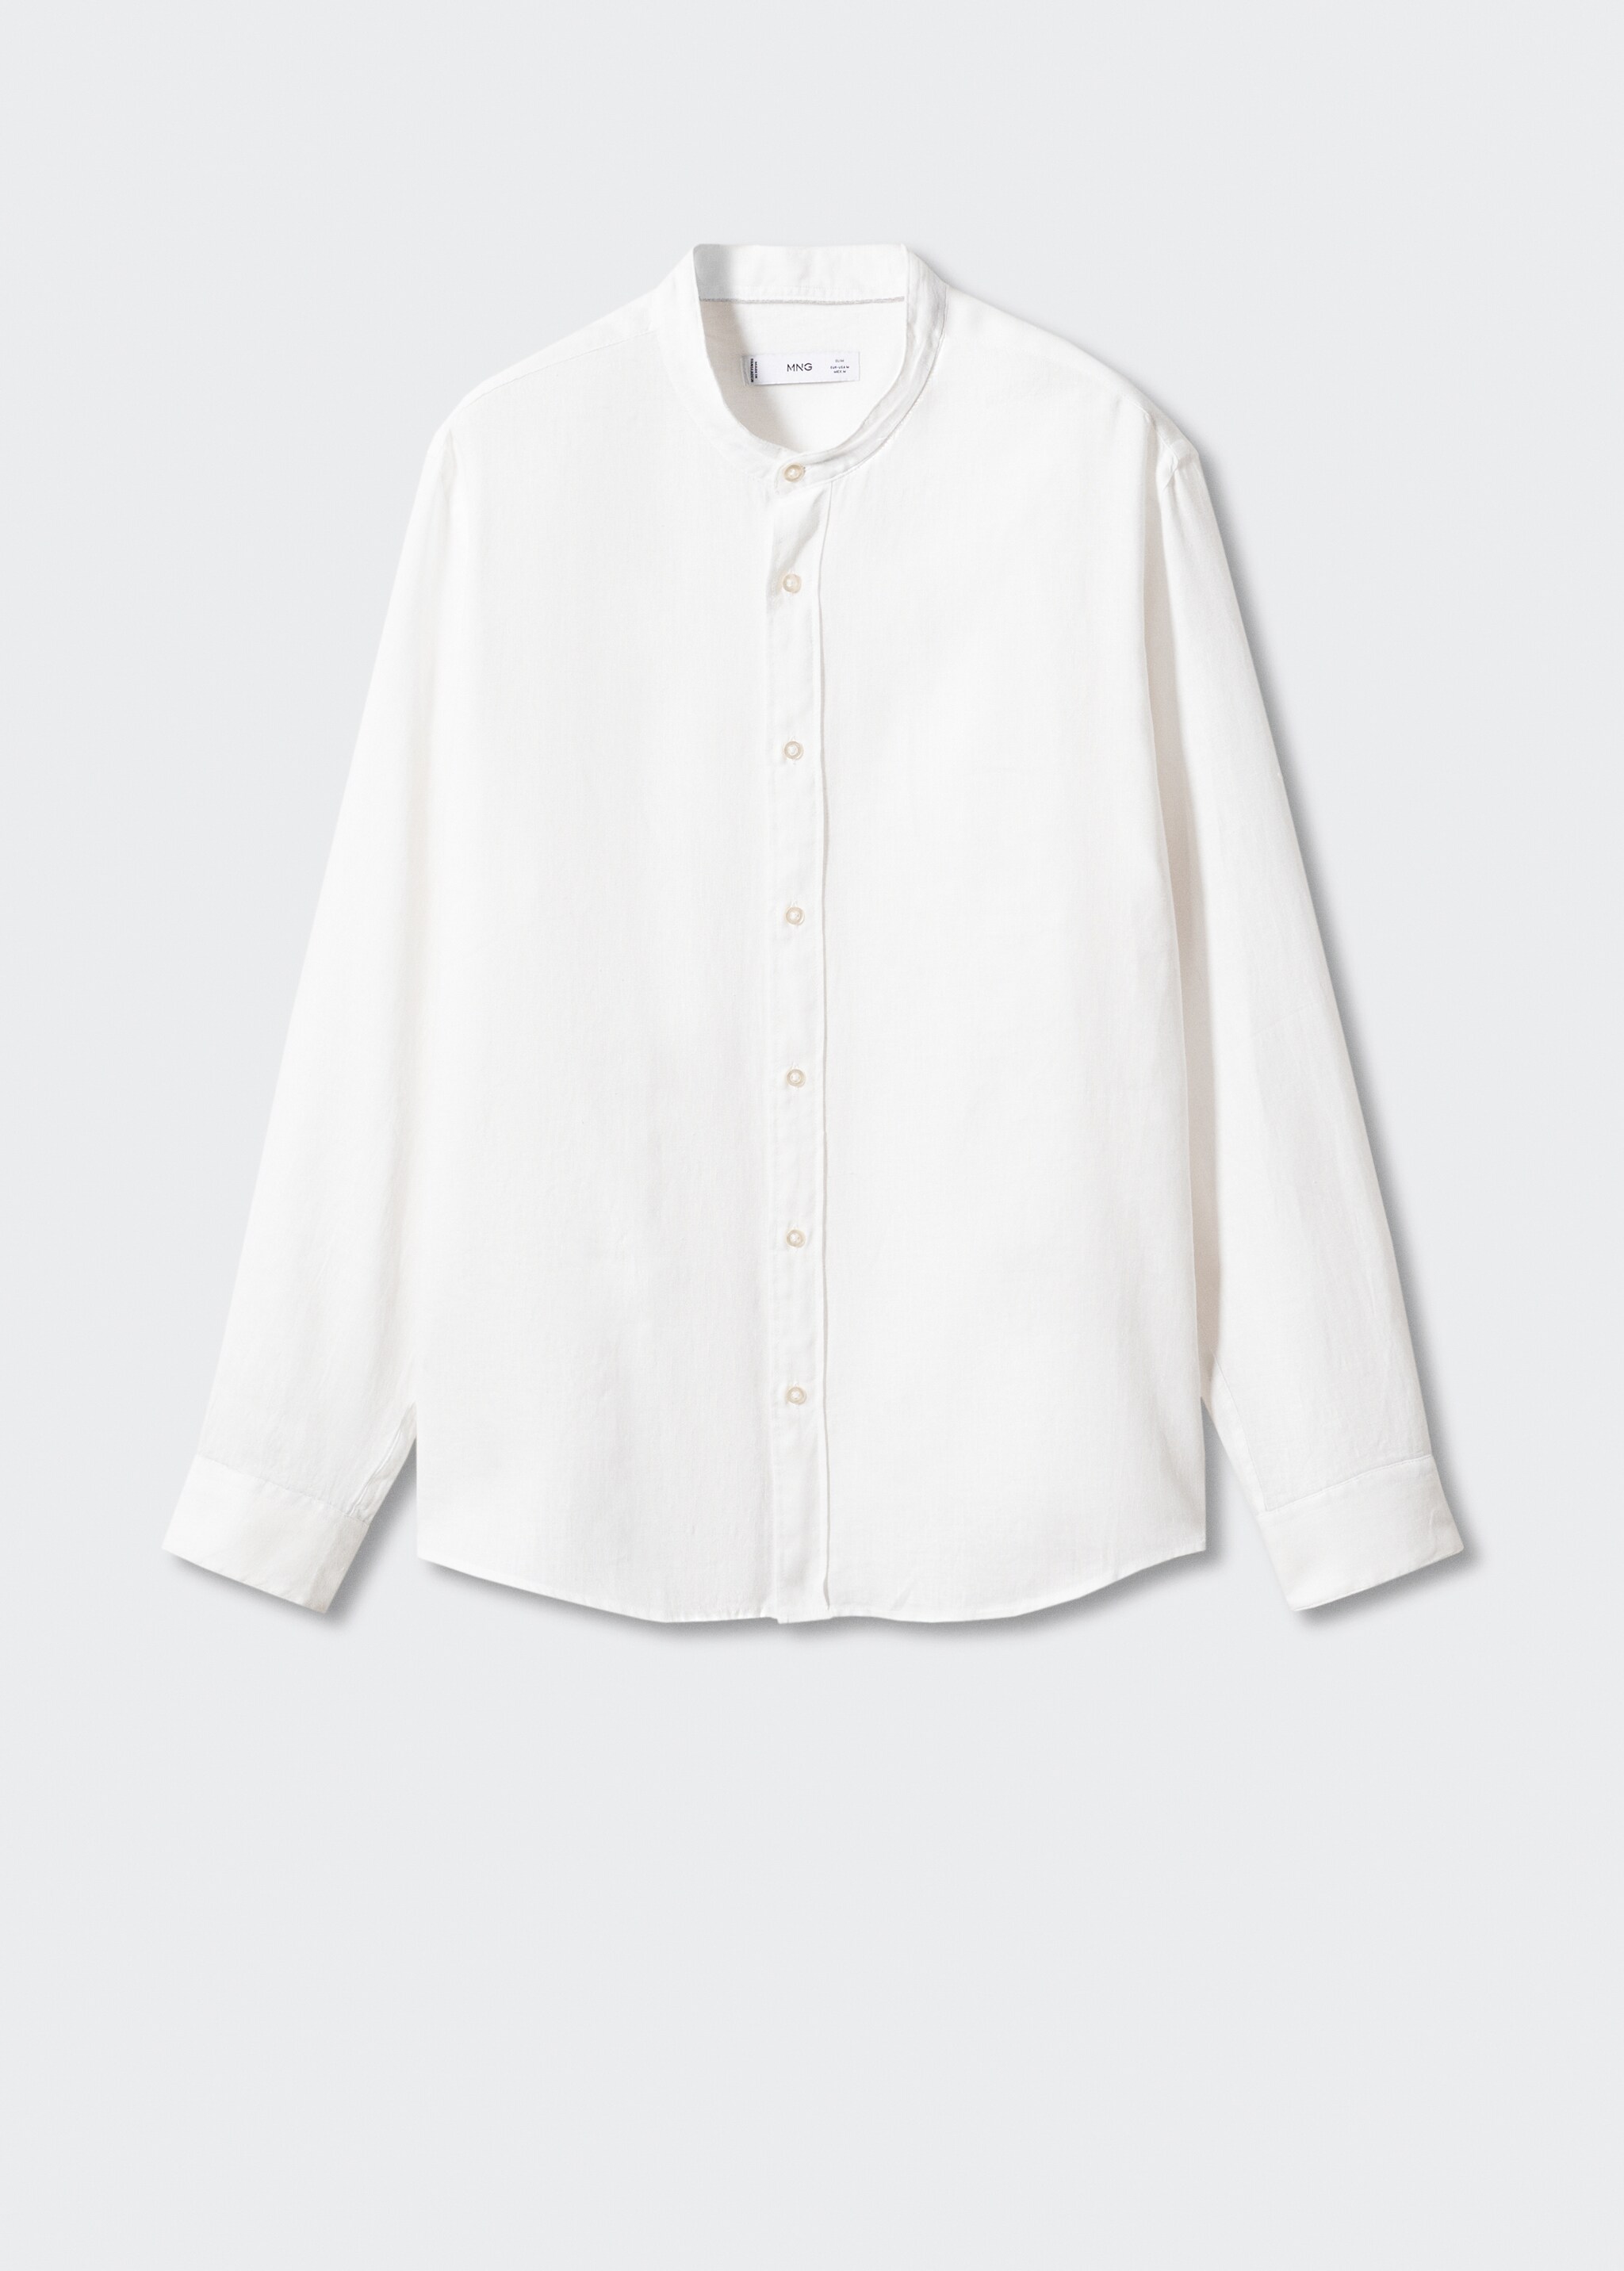 100% linen Mao collar shirt - Article without model